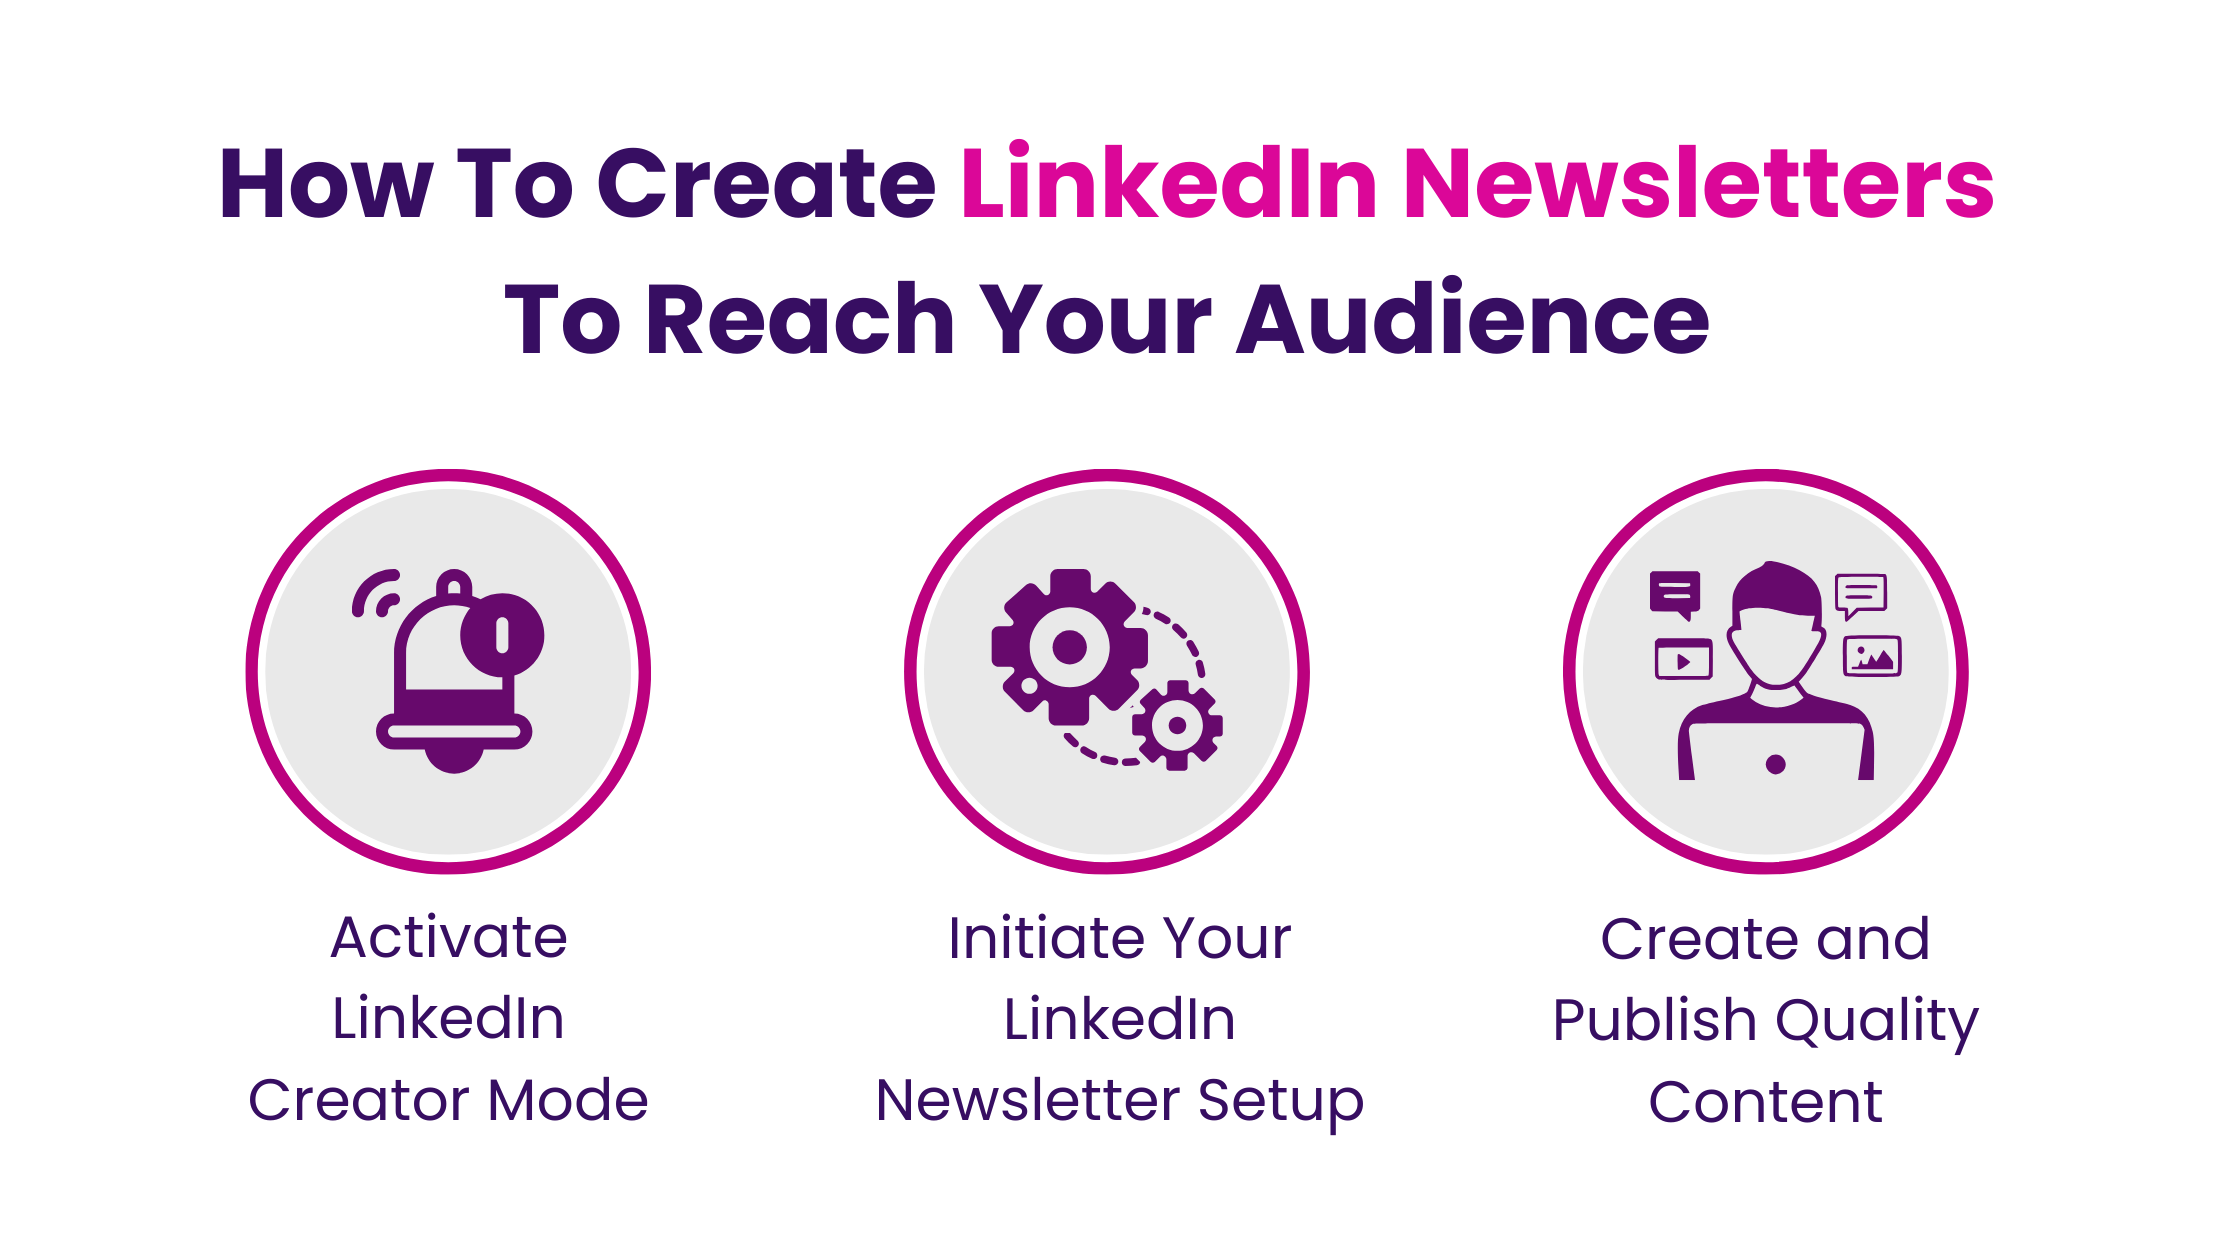 How To Create LinkedIn Newsletters To Reach Your Audience